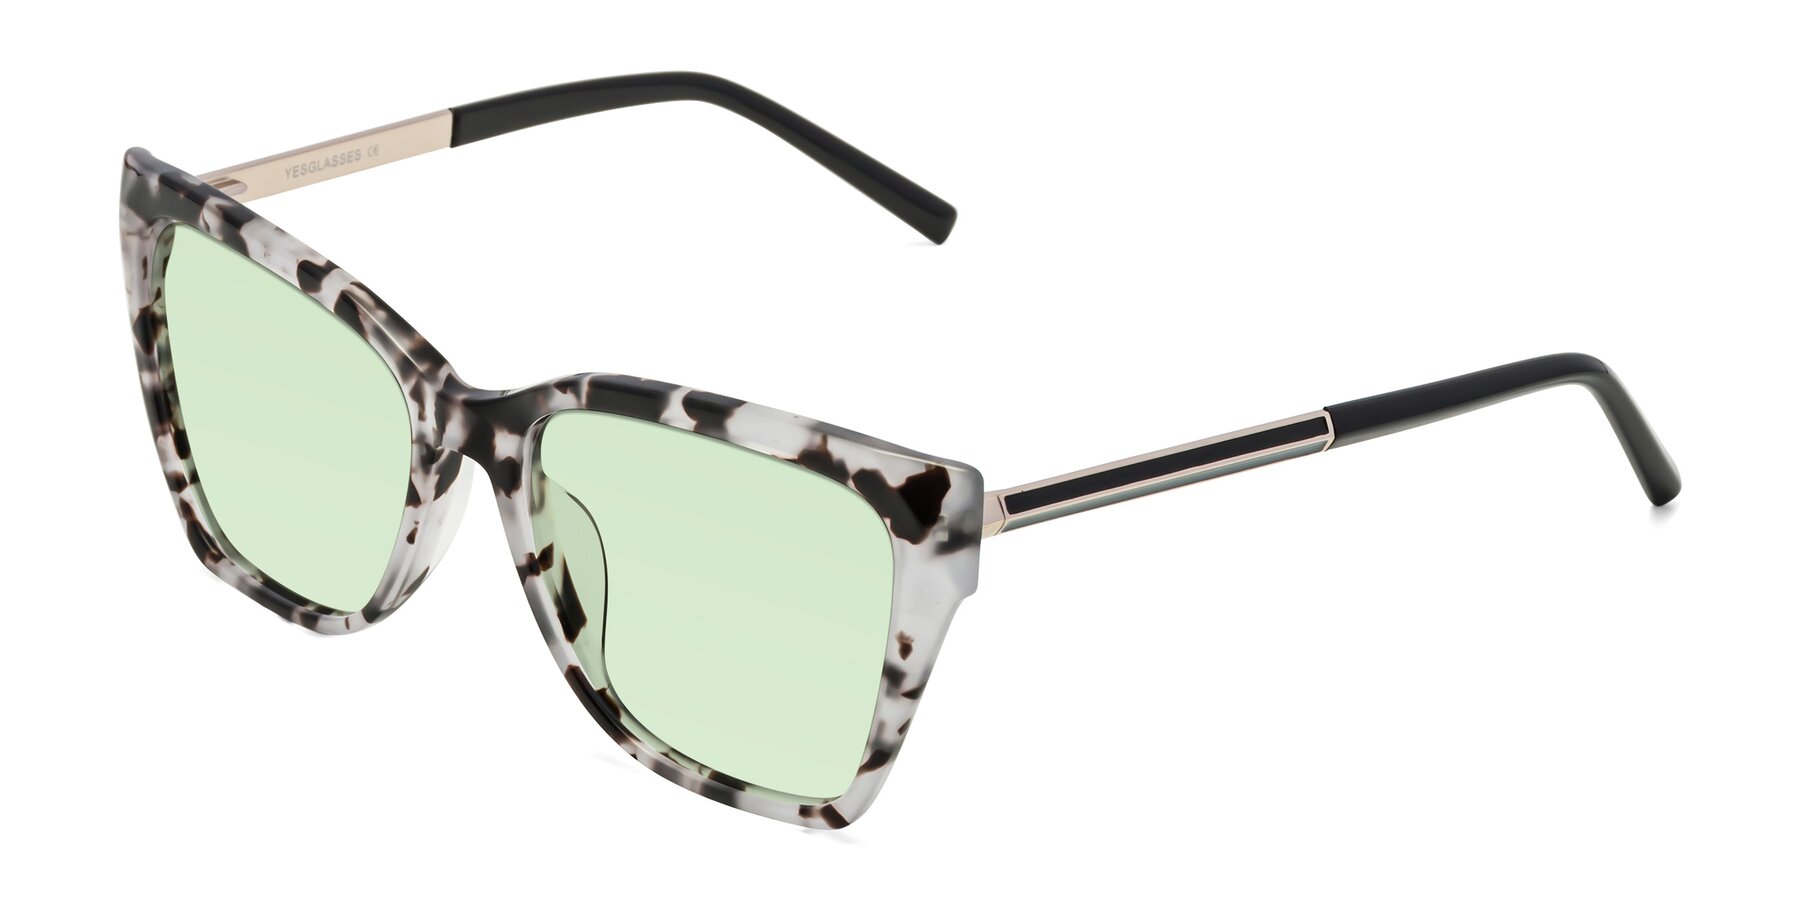 Angle of Swartz in White Tortoise with Light Green Tinted Lenses